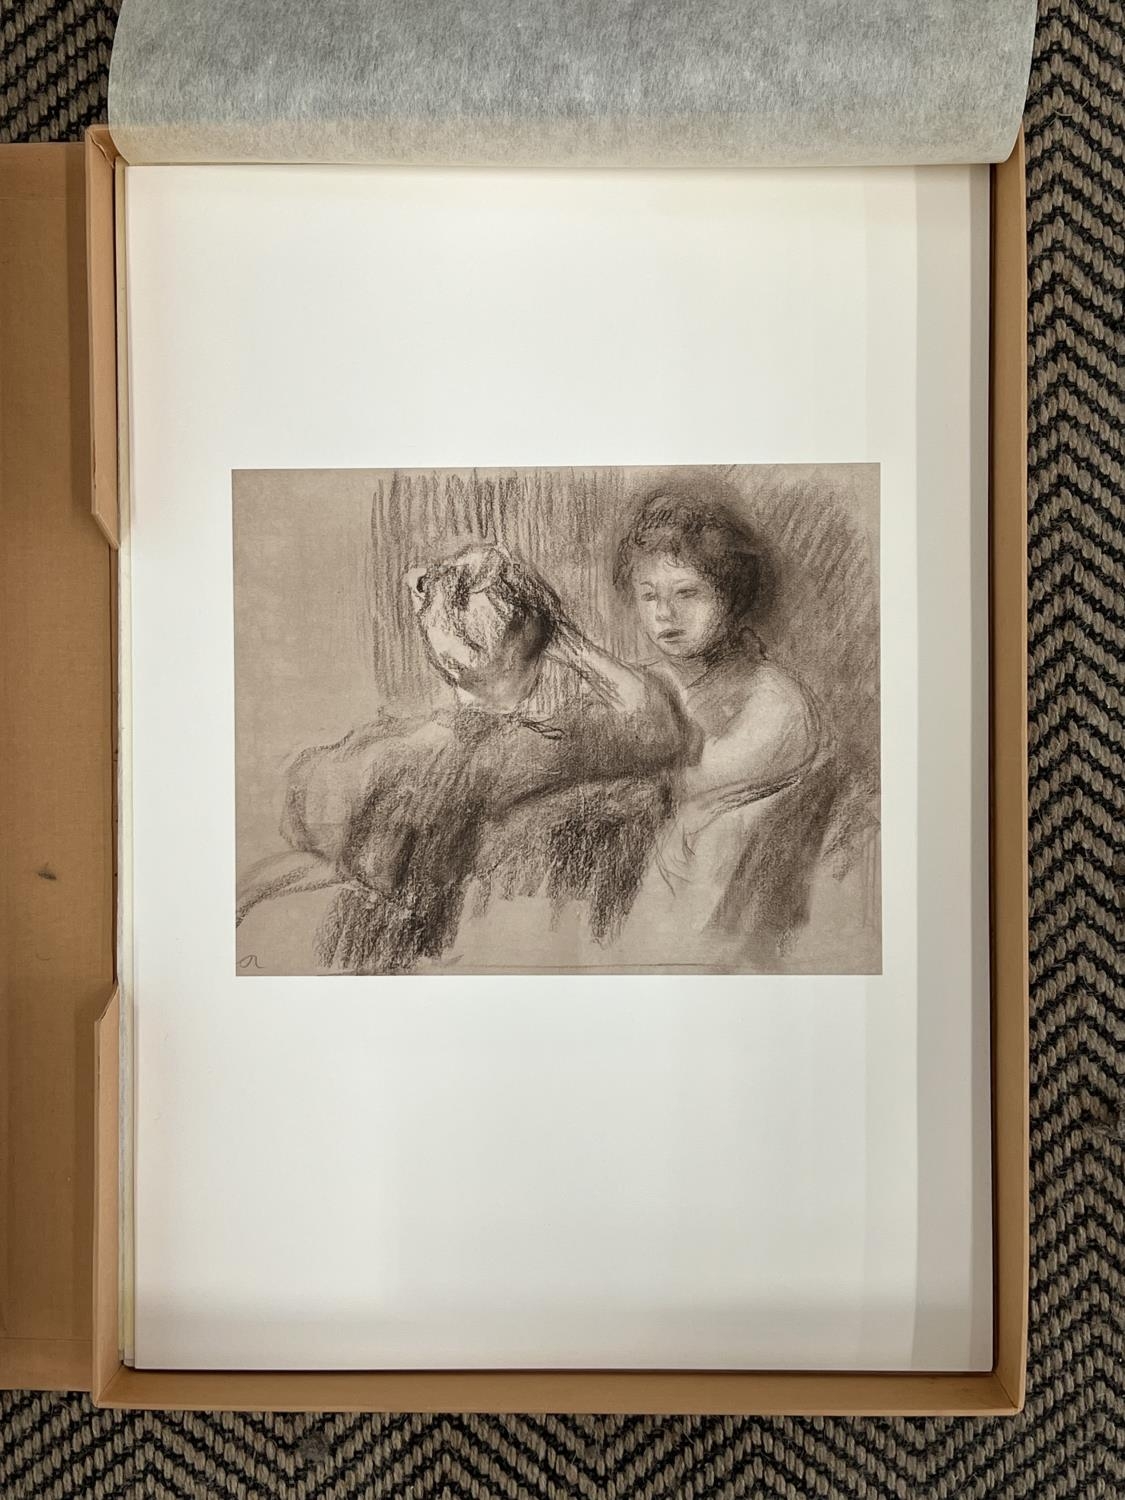 AFTER PIERRE AUGUSTE RENOIR, a folio of 24 off-set lithographs printed by Cartiere Miliani di - Image 23 of 28